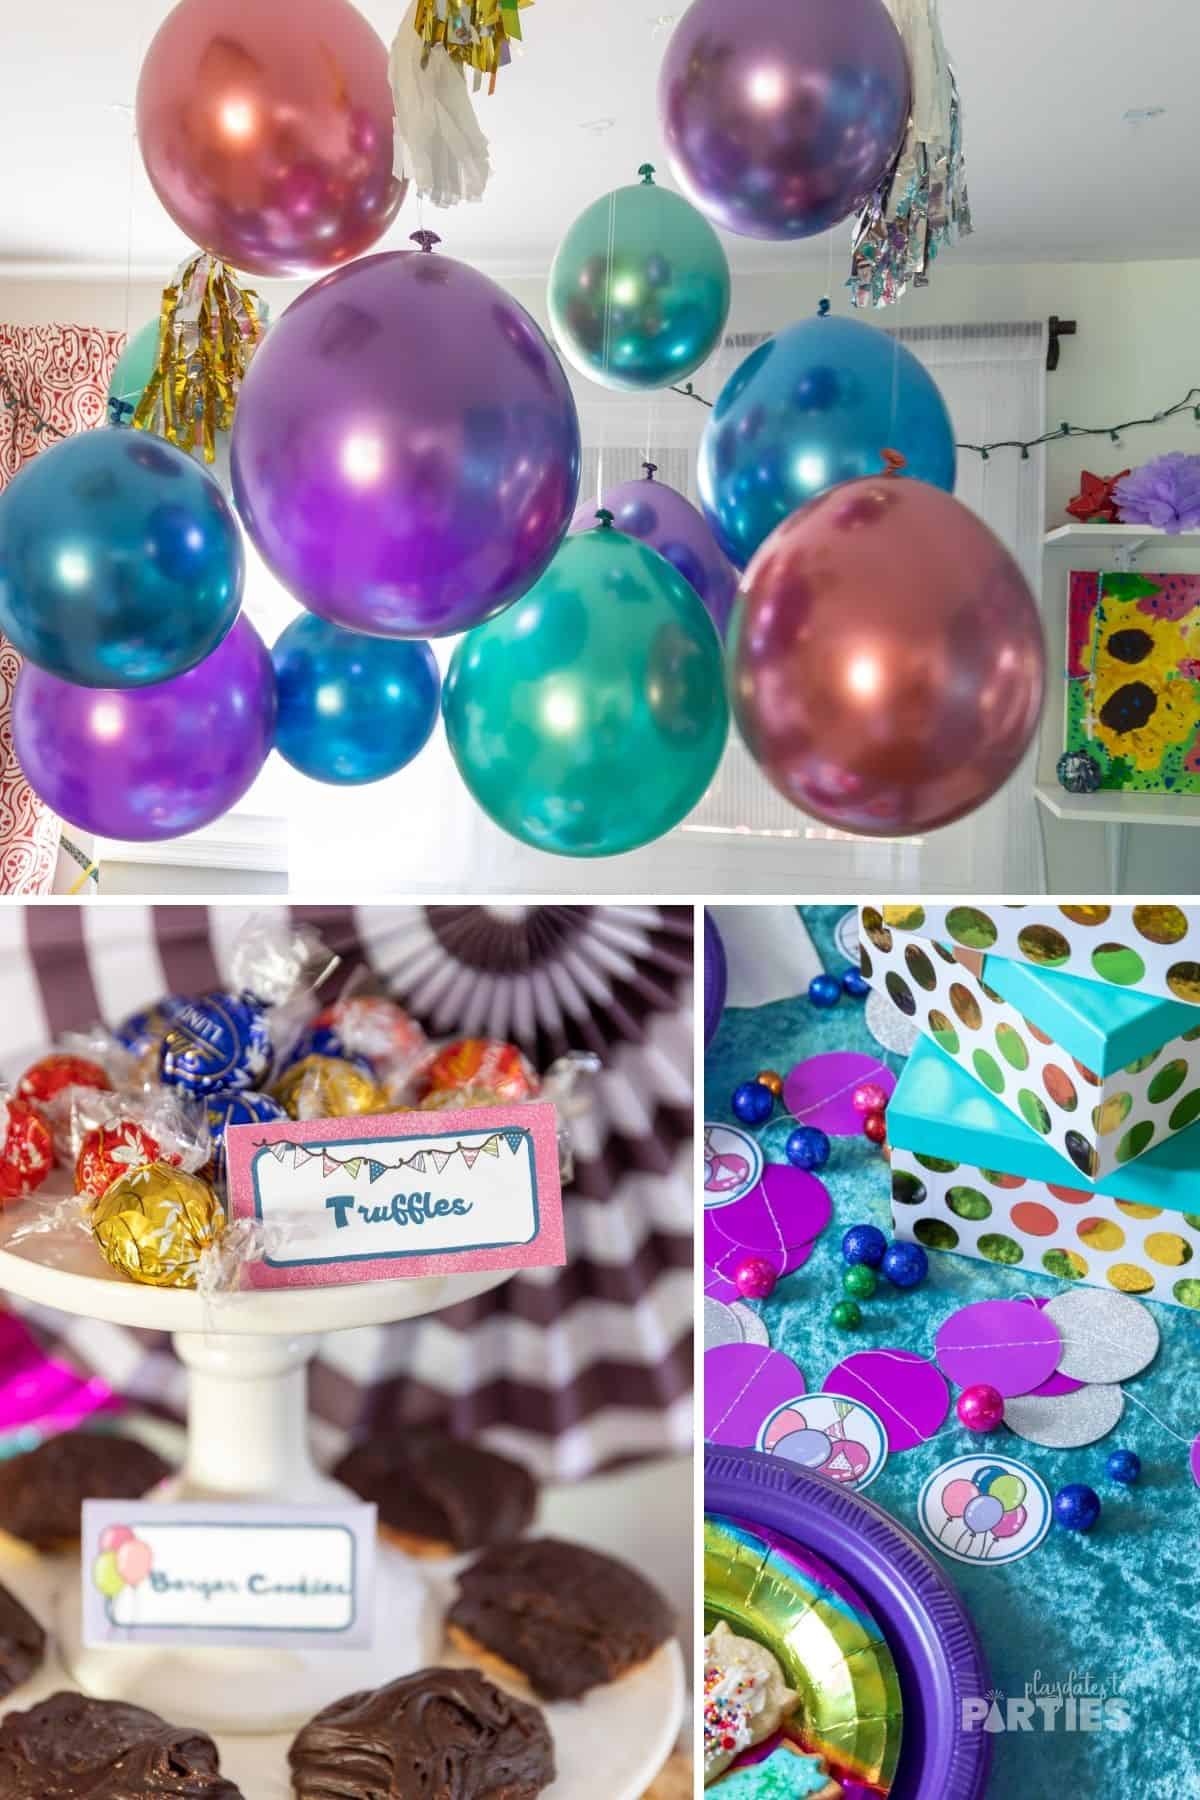 Collage of party decorations with a blue, purple, and pink color theme.